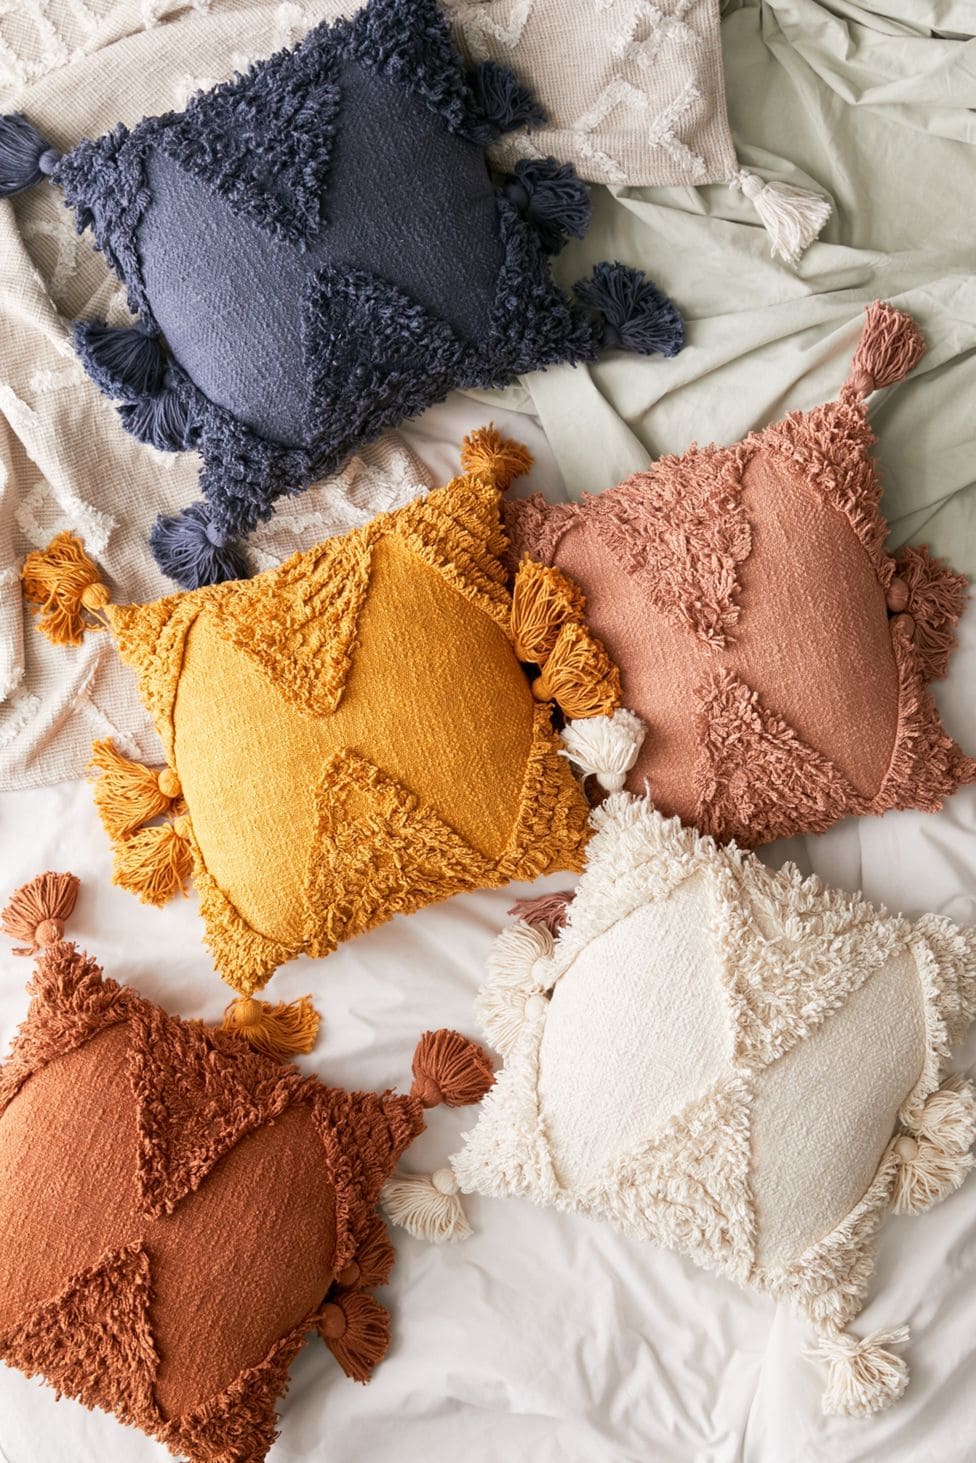 Shag Throw Pillows Great for Warm Colors